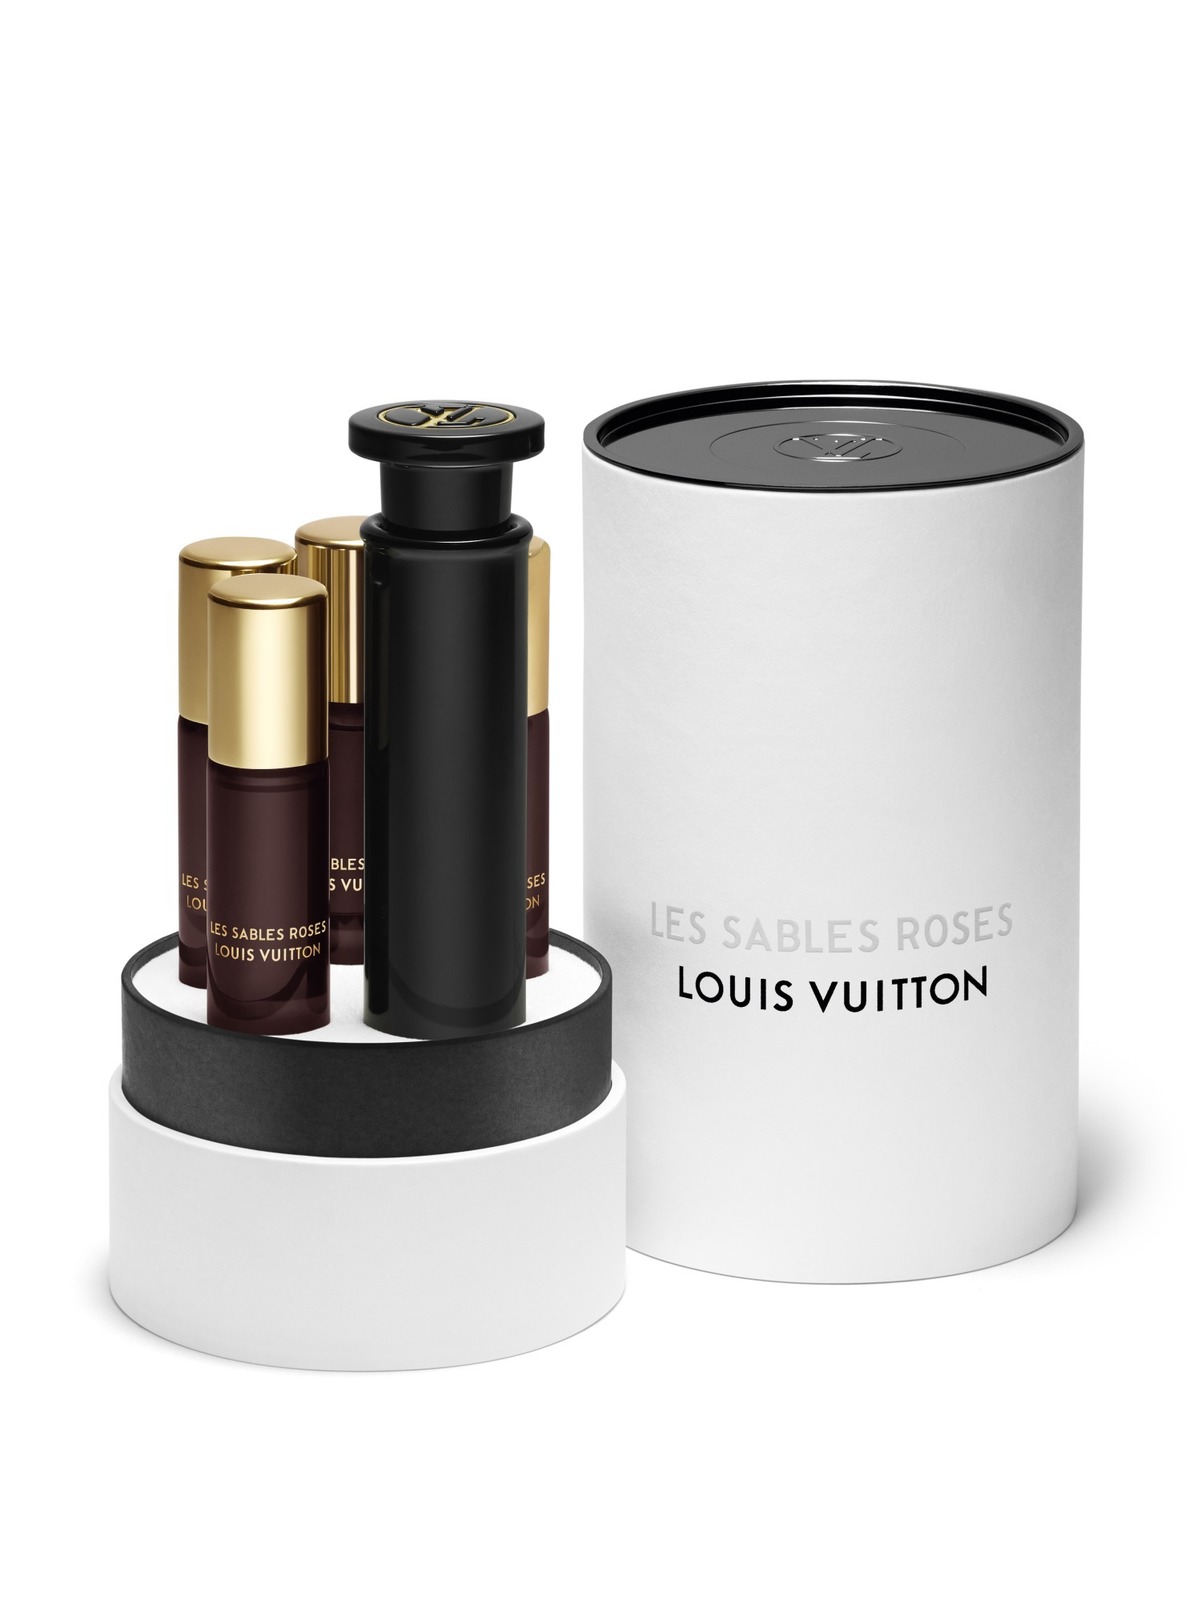 Les Sables Roses Louis Vuitton perfume - a new fragrance for women and men 2019